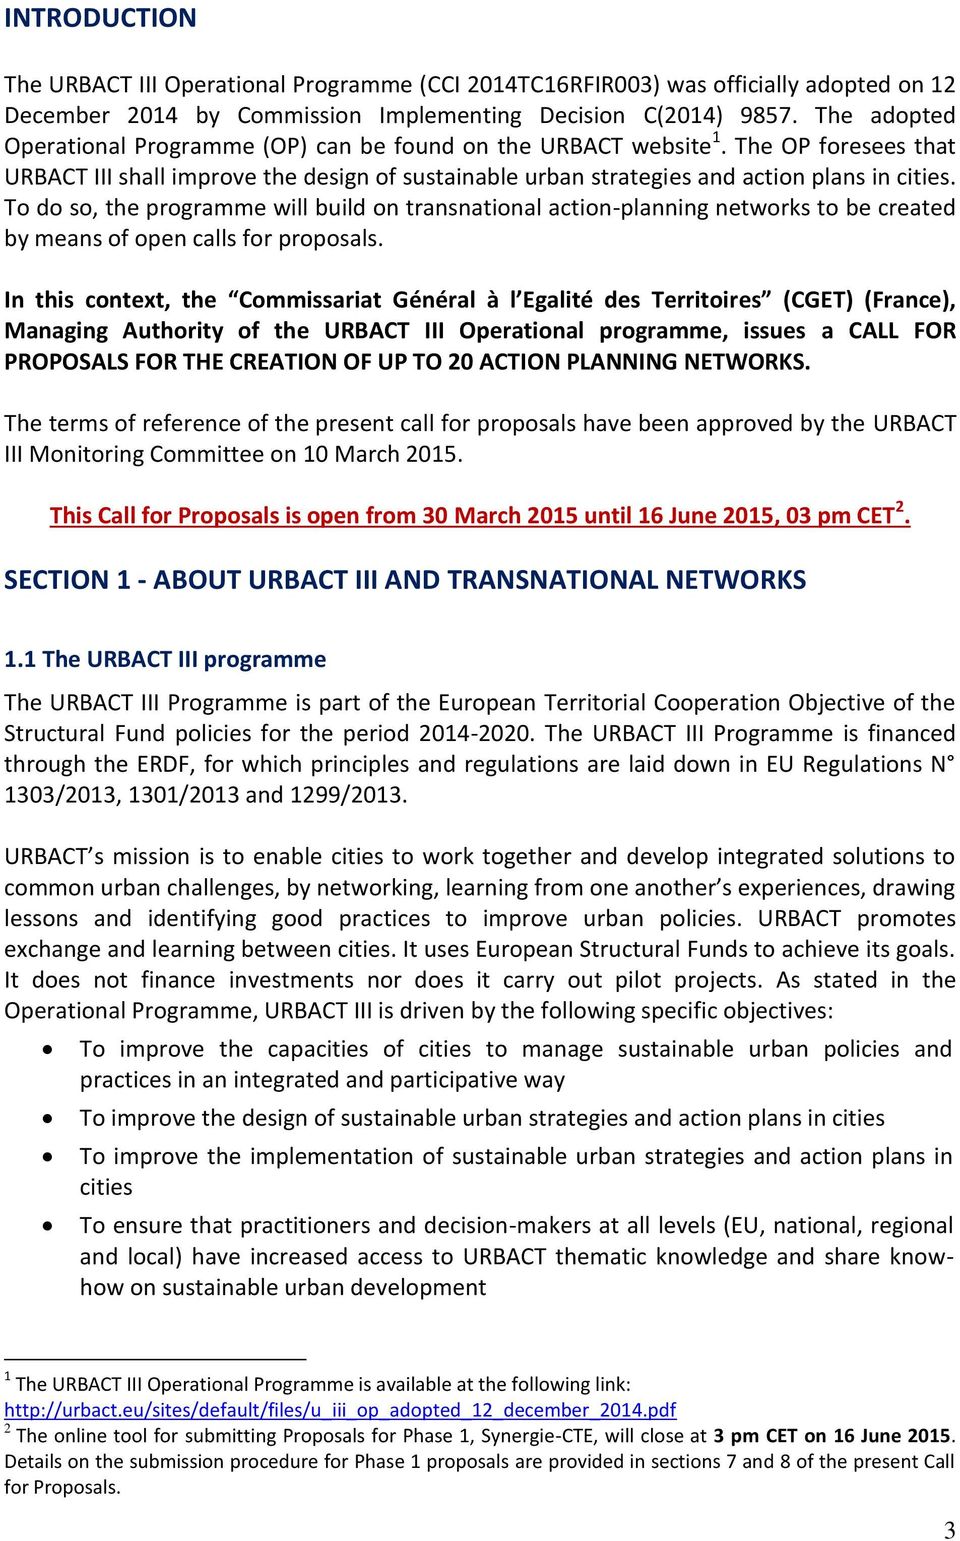 To do so, the programme will build on transnational action-planning networks to be created by means of open calls for proposals.